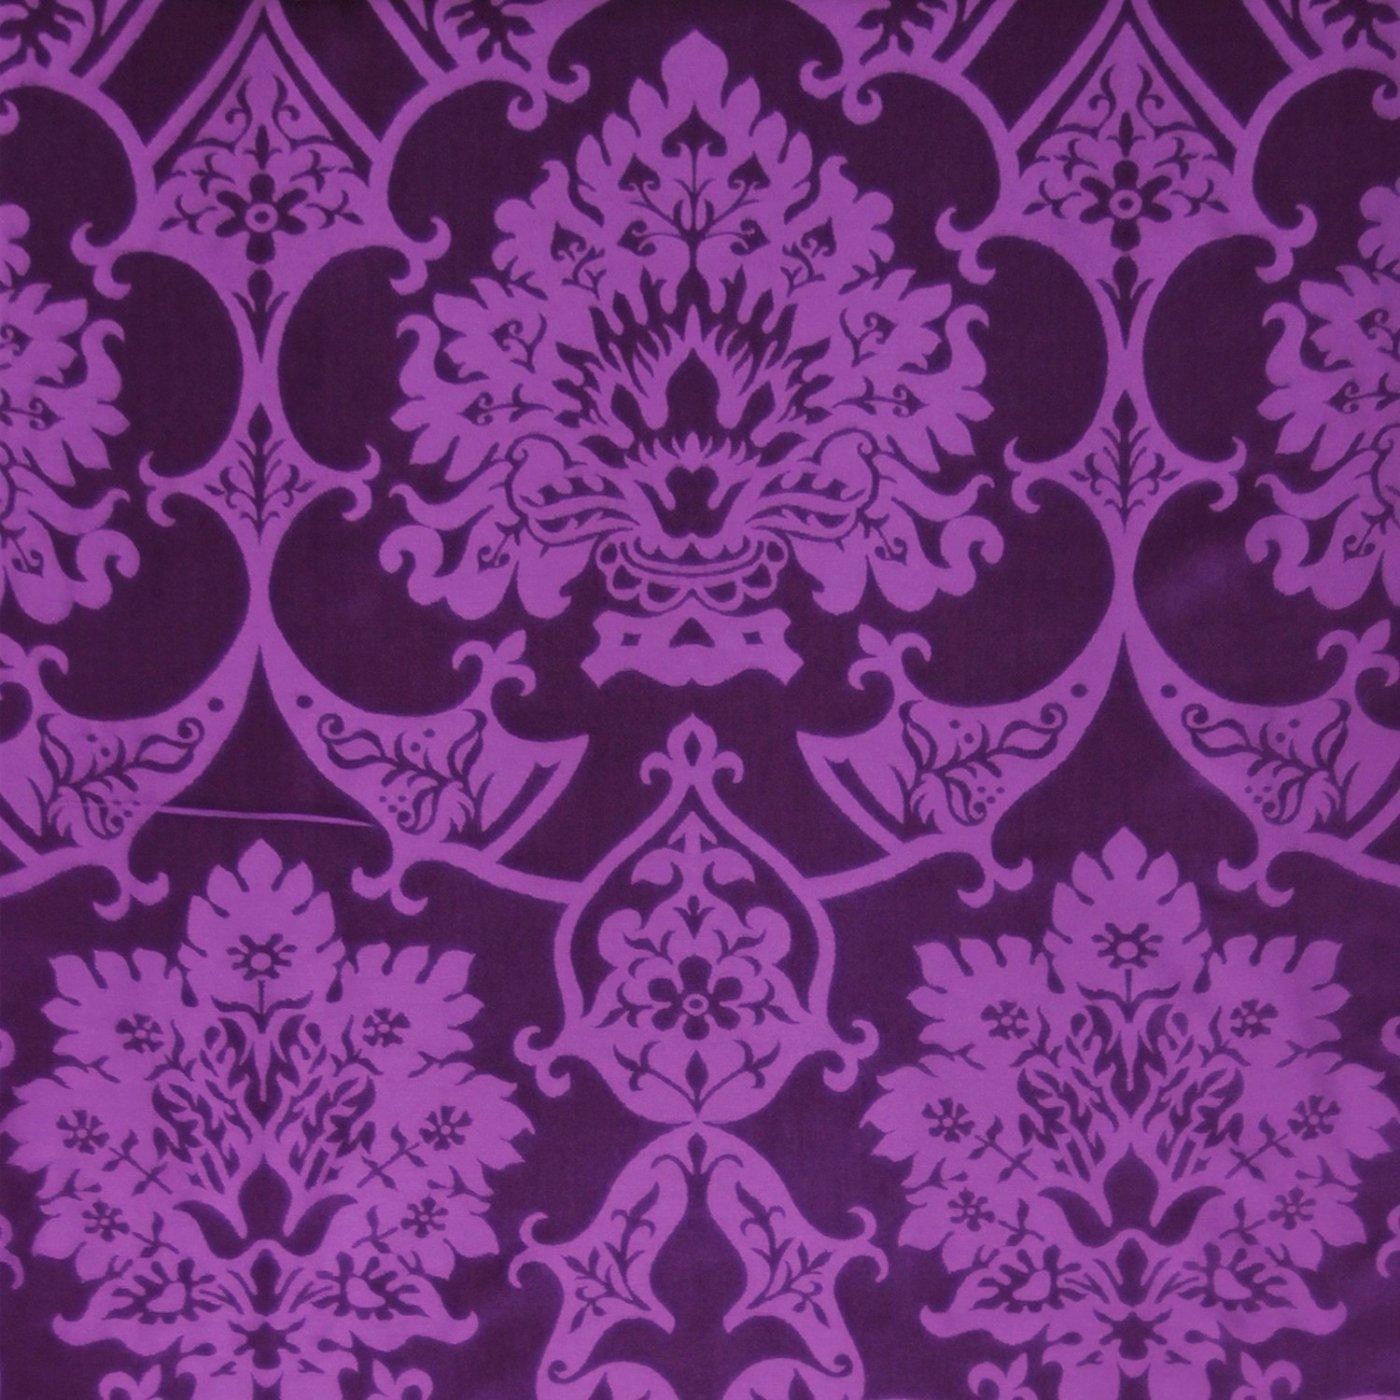 Minster Cope in Royal Purple Gothic with Royal Purple/Gold Gothic Orphreys - Watts & Co. (international)